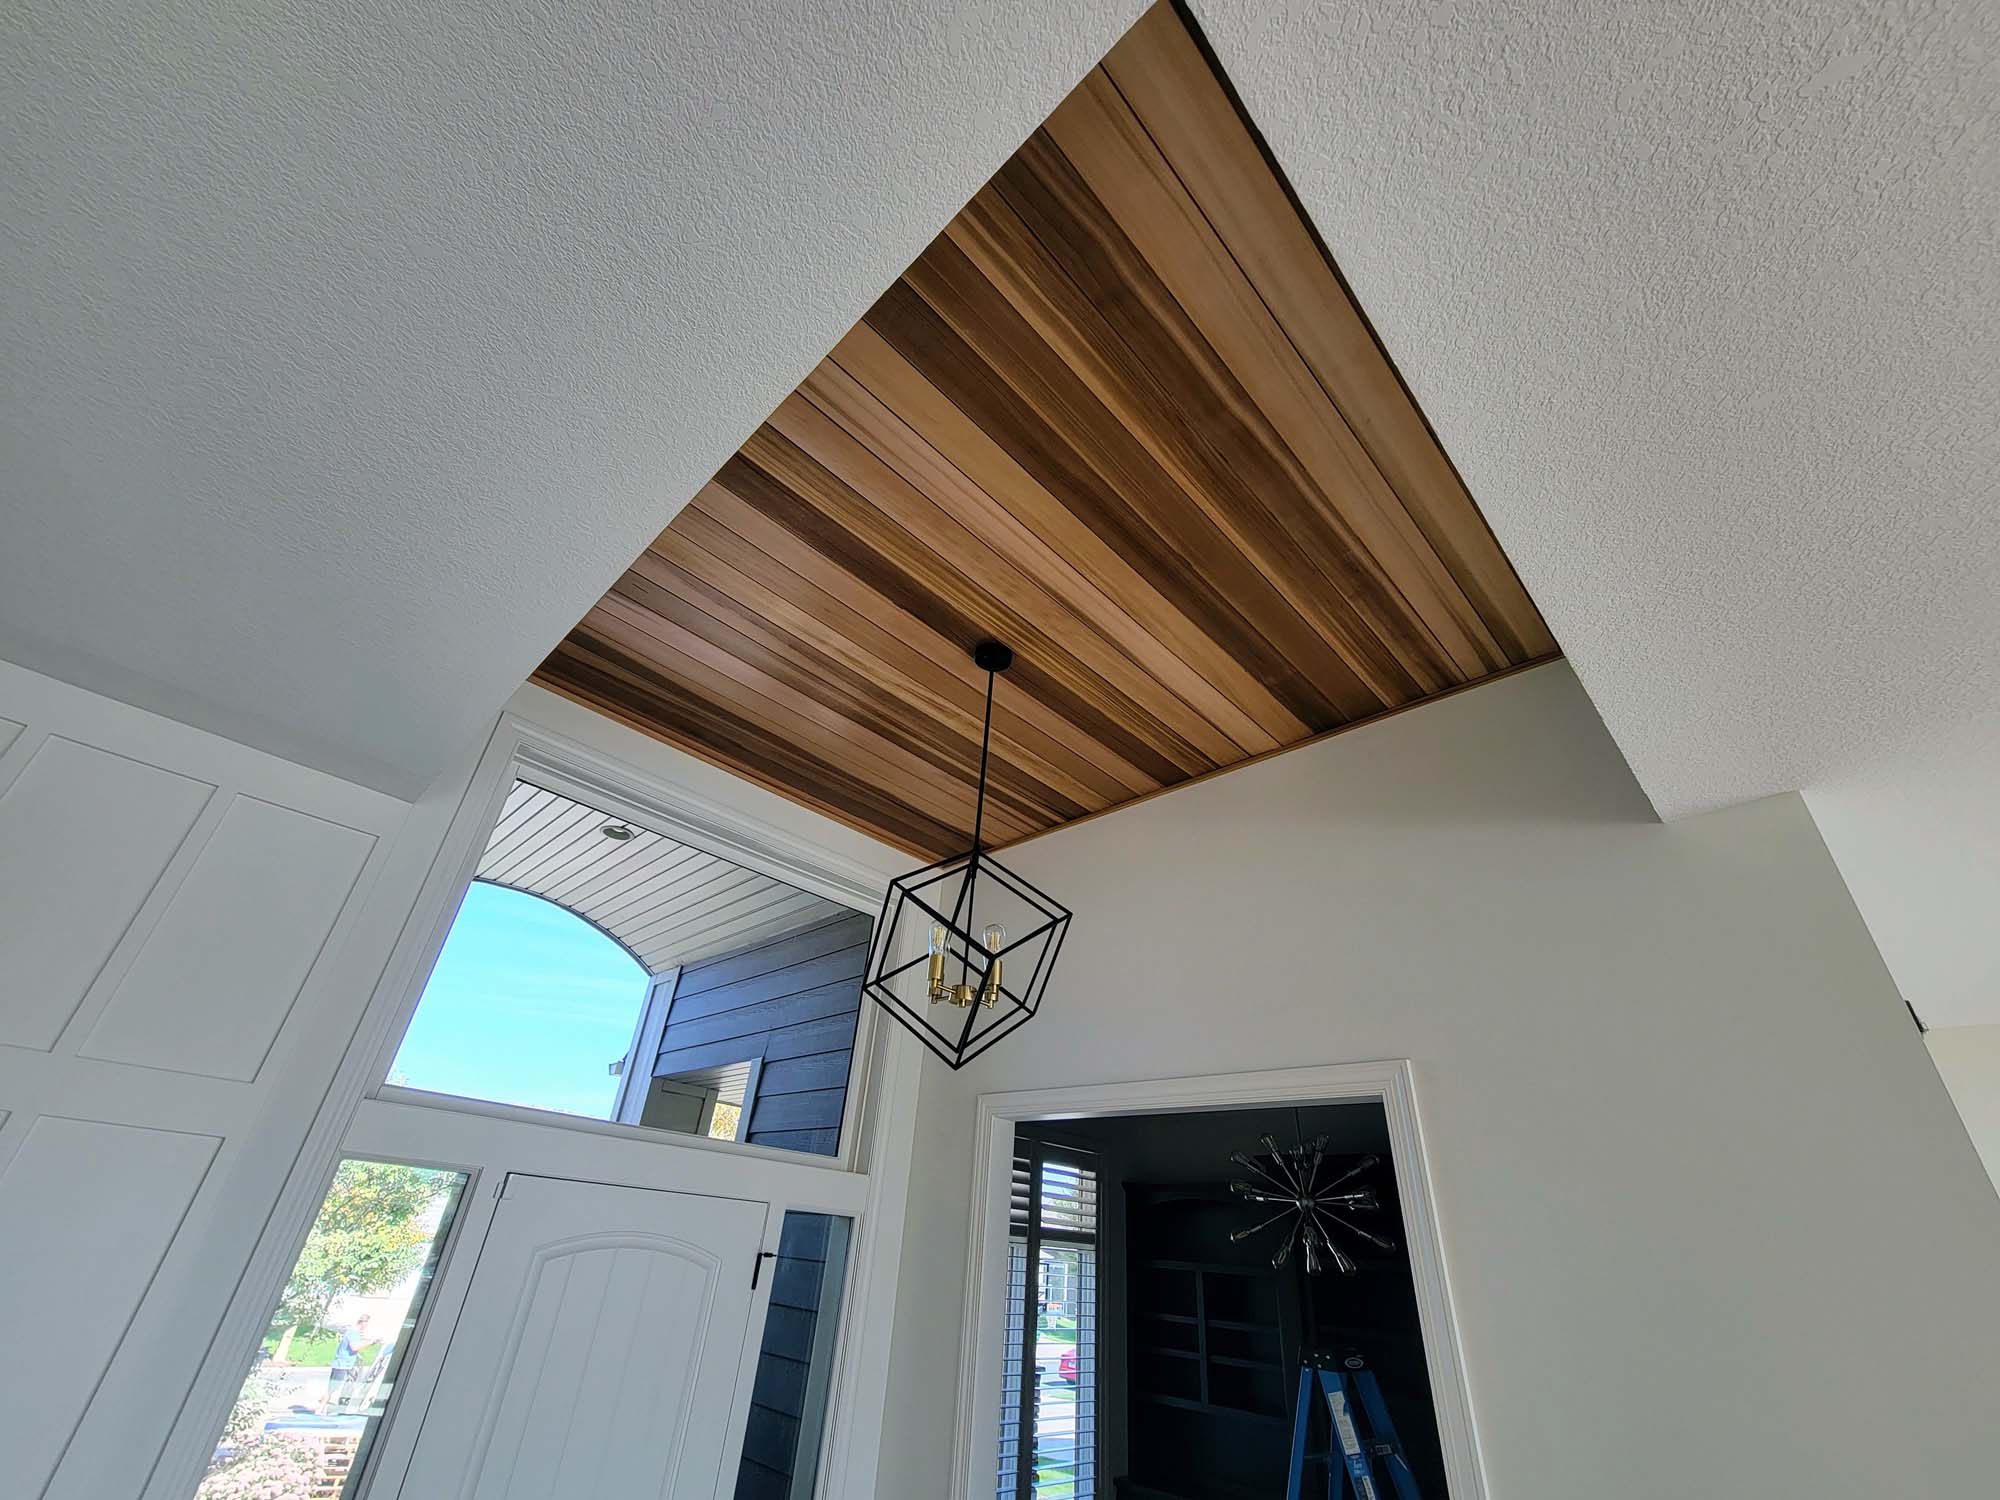 Foyer wood ceiling for modern rustic style